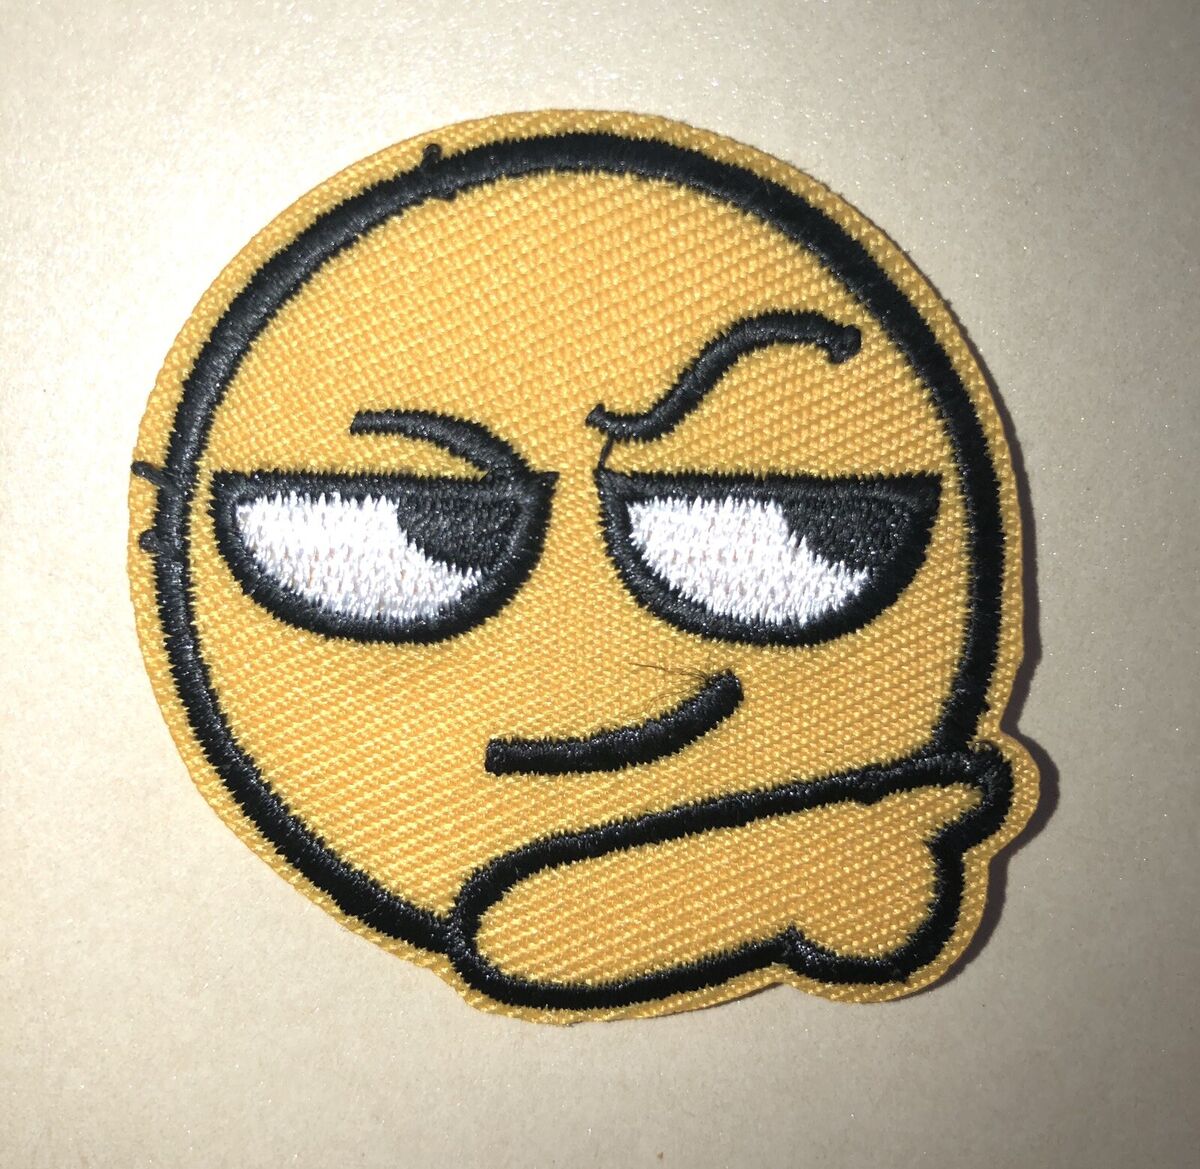 Derp Face Emoji Meme Iron On Embroidered Patch 